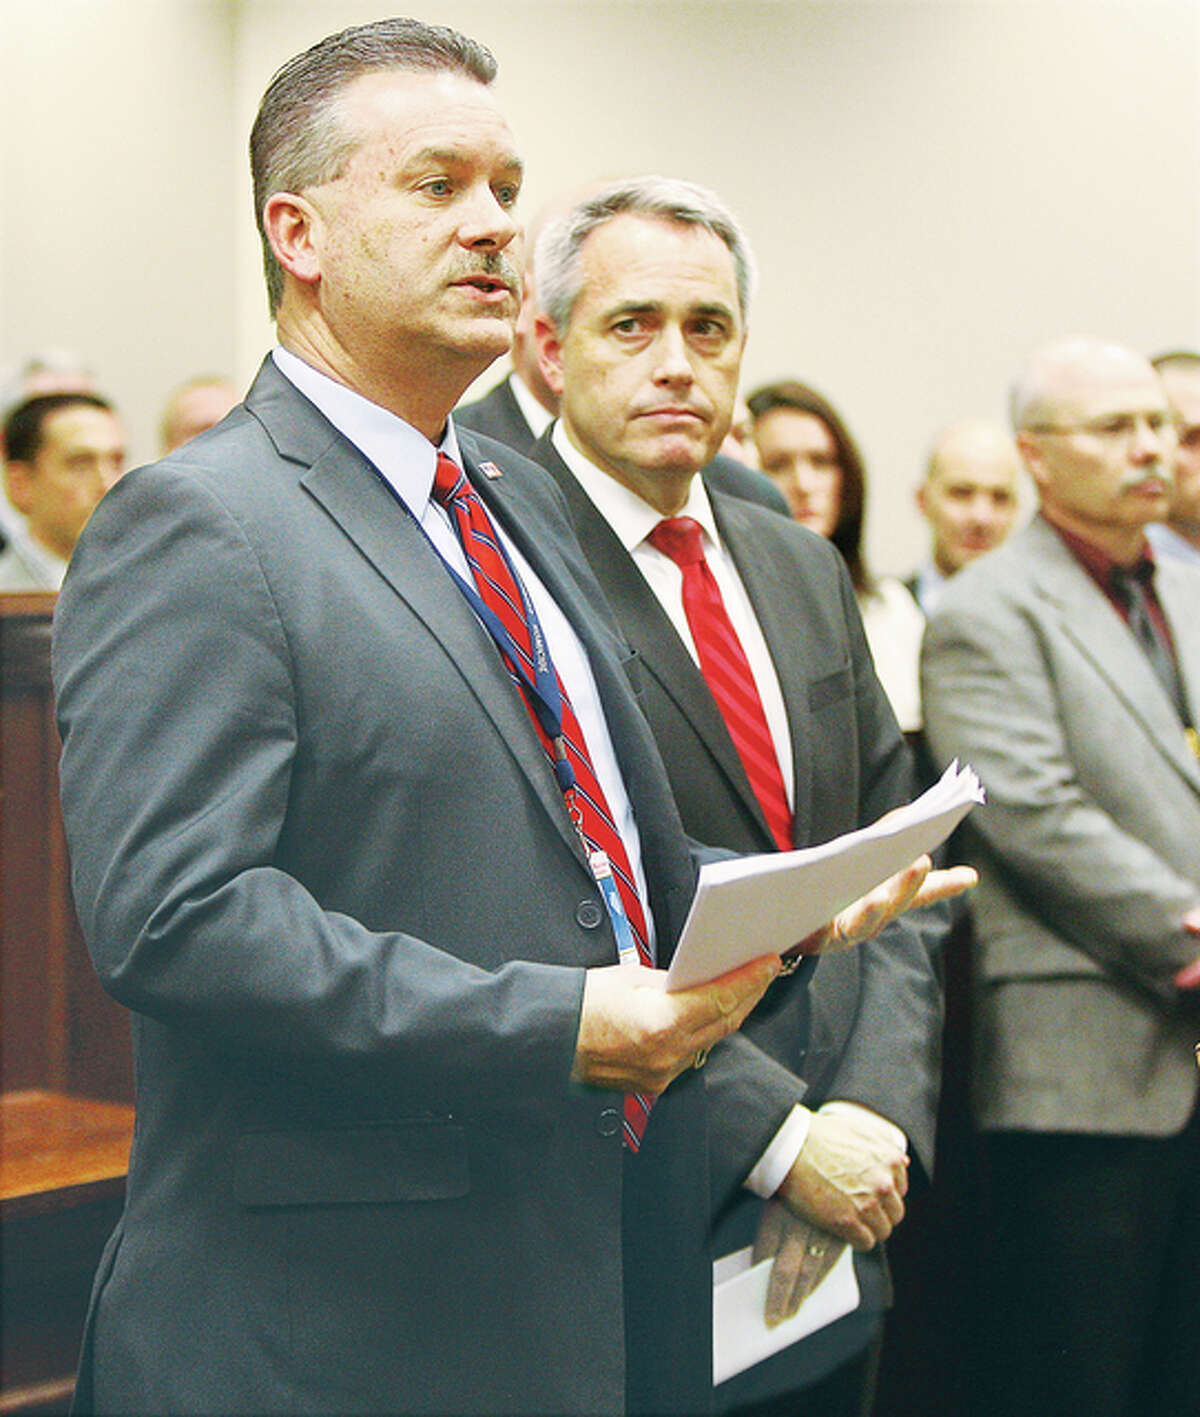 Maj. Jeff Connor, deputy commander of the Major Case Case Squad of St. Louis in Illinois, left, talks to the press Thursday at the Alton Law Enforcement Center about the arrest of an 18-year-old male in connection with the homicide of 11-year-old Romell Jones. Madison county State’s Attorney Tom Gibbons, right, listens before addressing the press. Jones was not the intended target of the shooting.